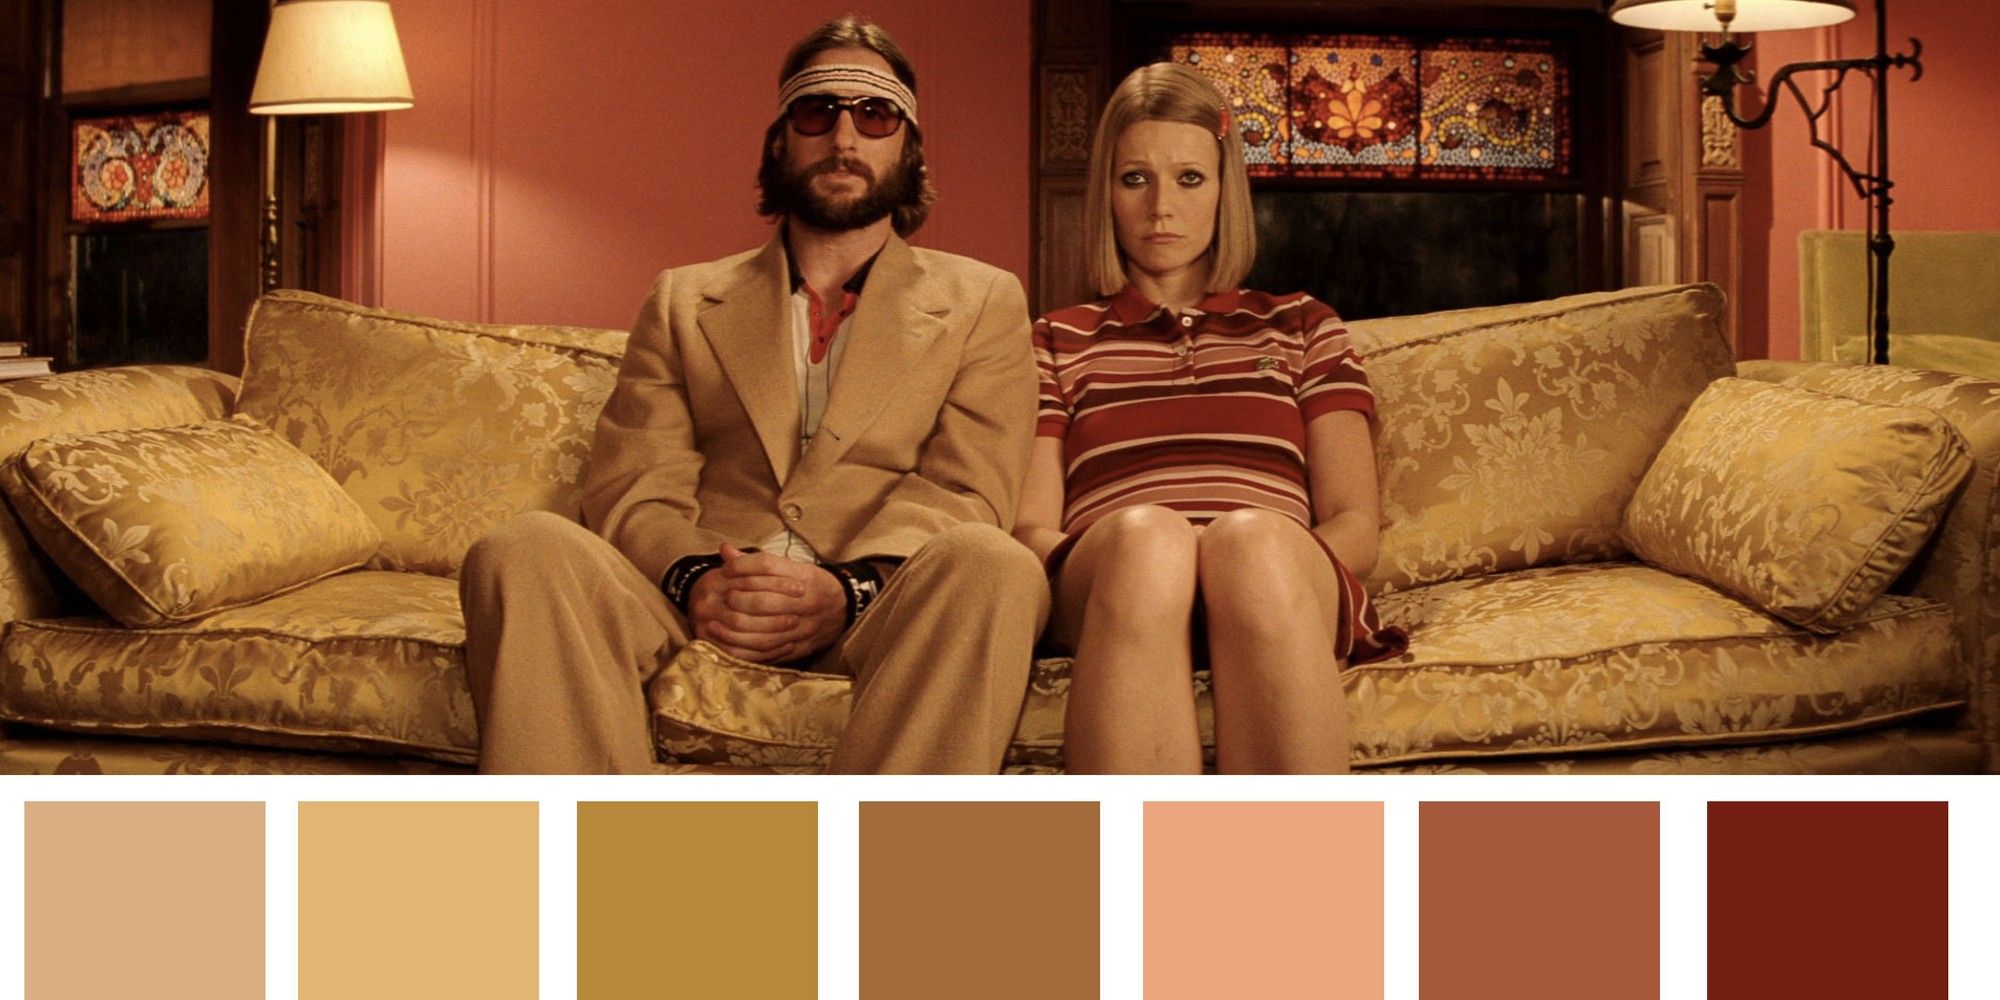 The Color Palette in Wes Anderson Films